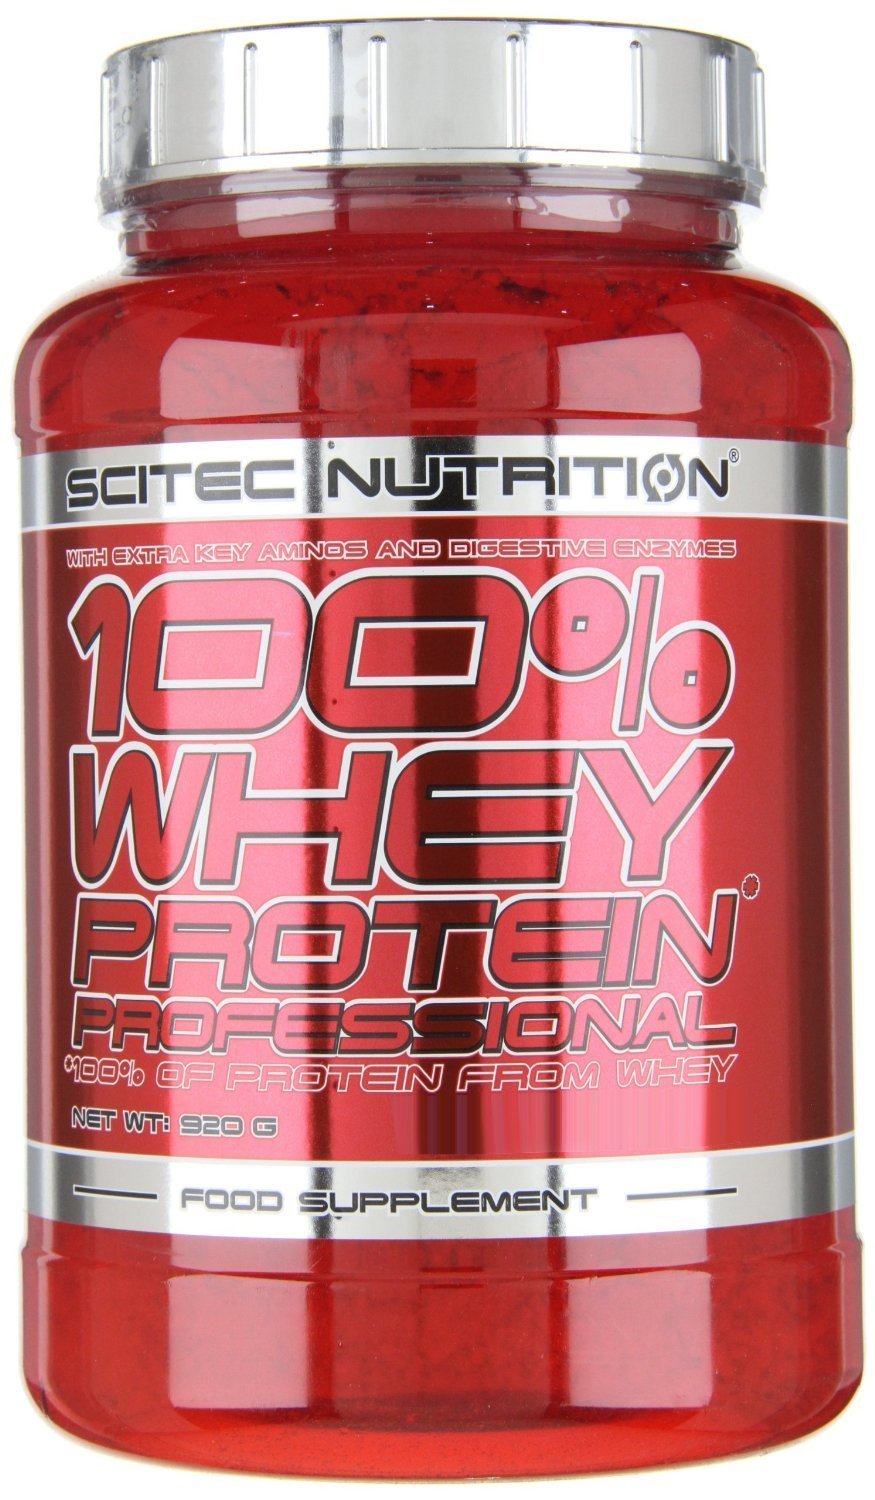 100% Whey Protein Professional, 920 g, Scitec Nutrition. Whey Concentrate. Mass Gain recovery Anti-catabolic properties 